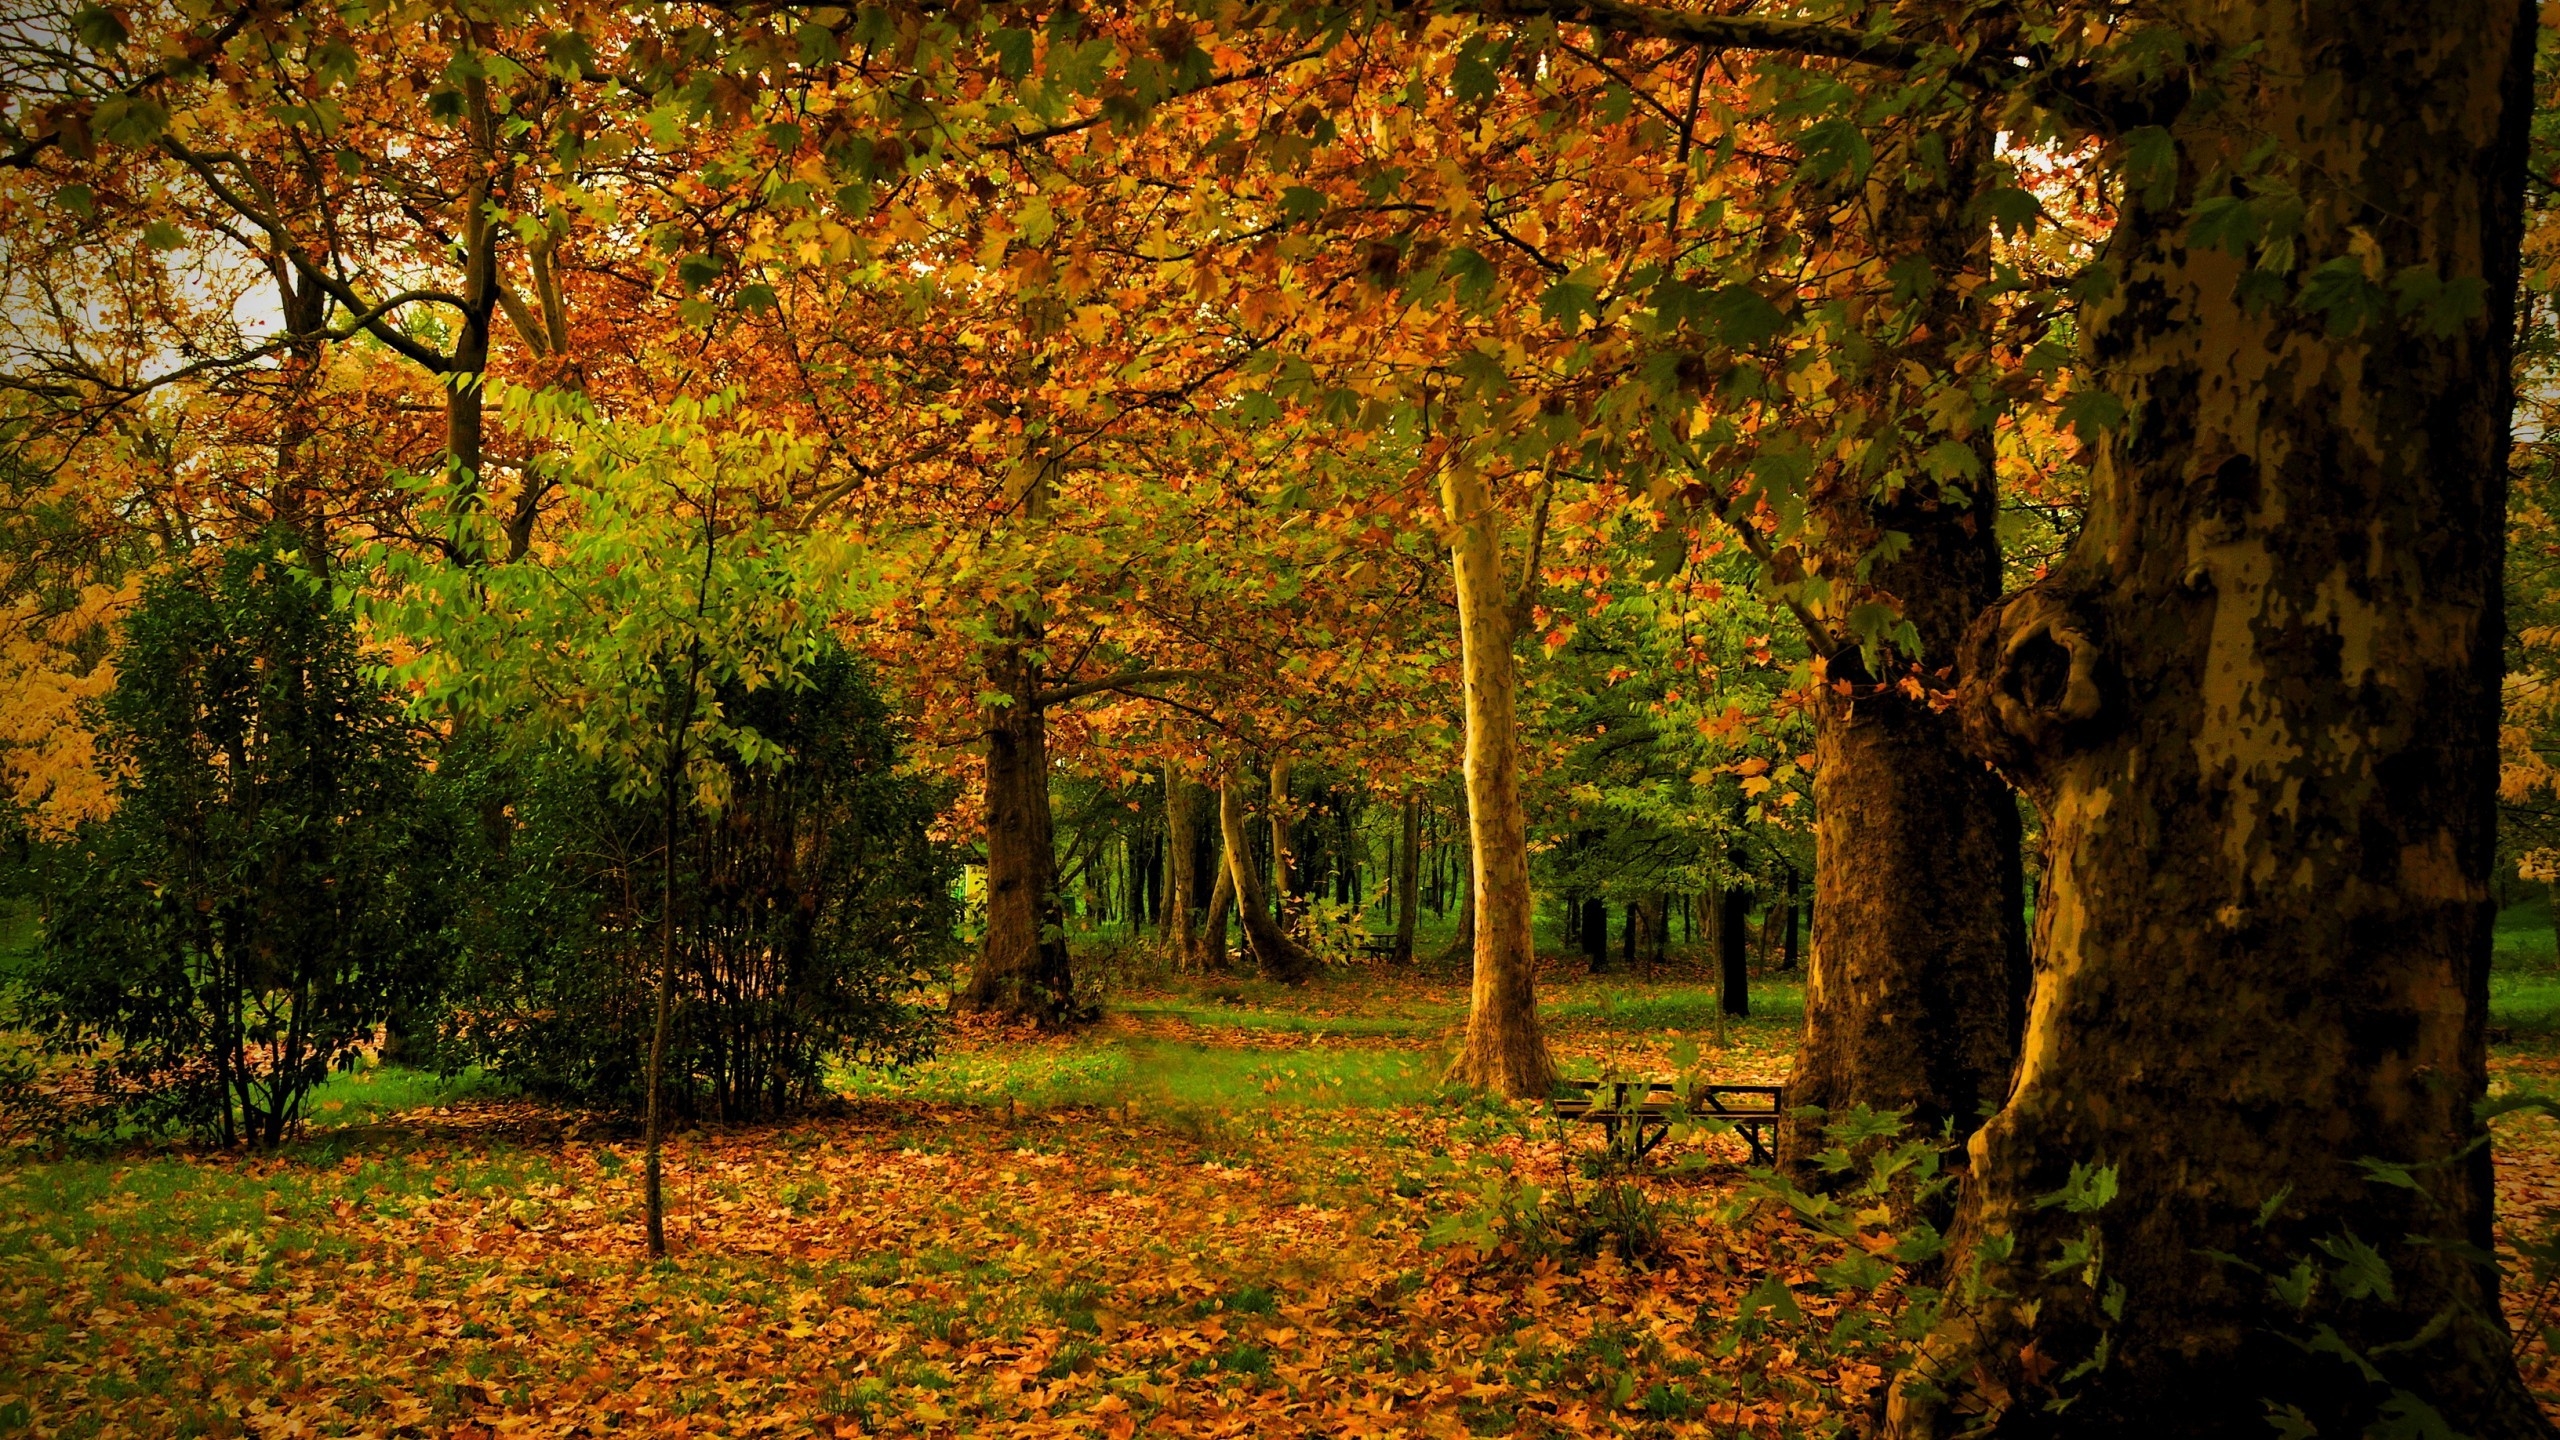 Just Autumn Time for 2560x1440 HDTV resolution